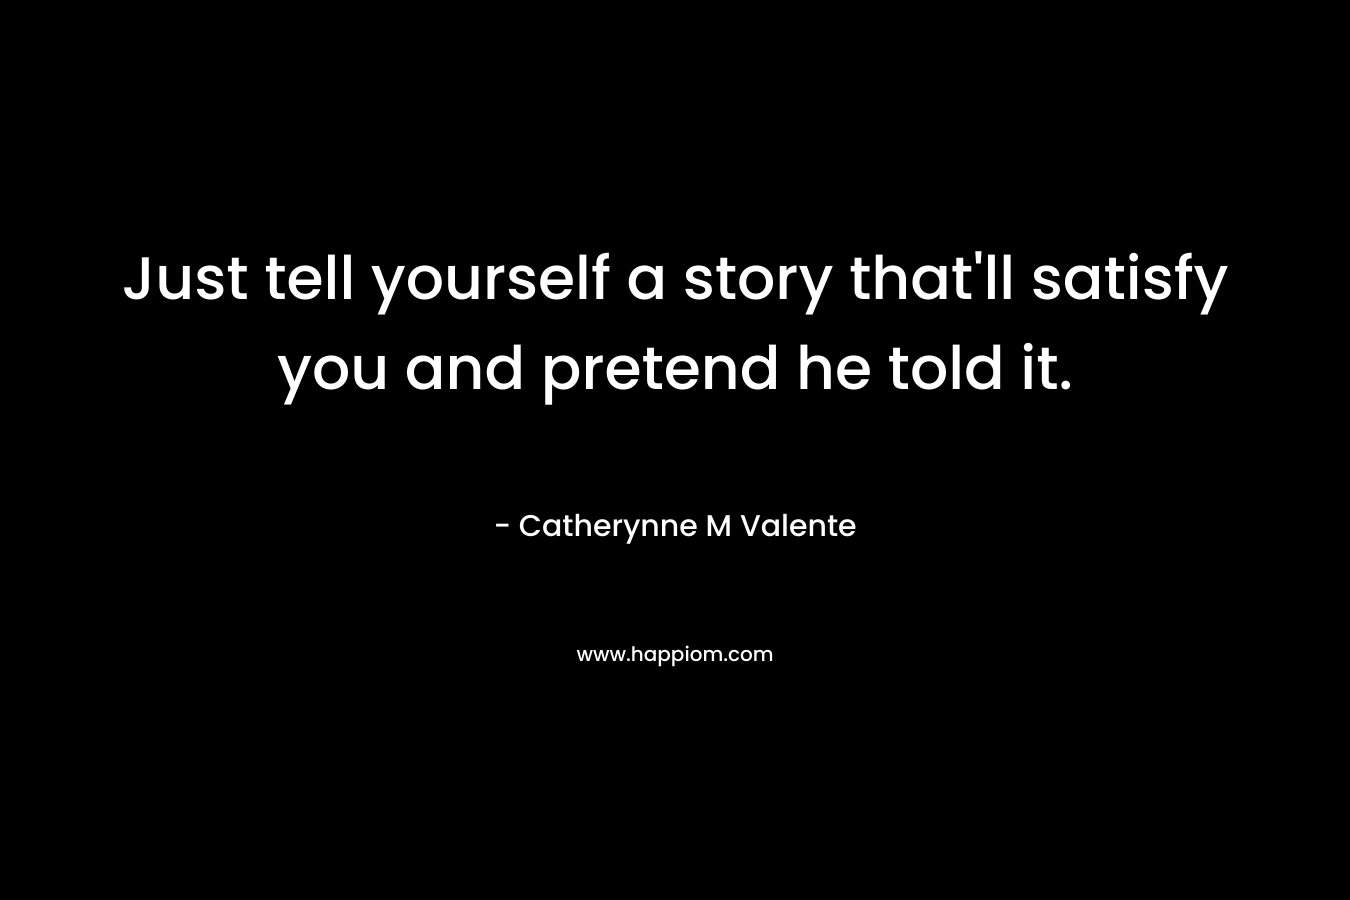 Just tell yourself a story that’ll satisfy you and pretend he told it. – Catherynne M Valente